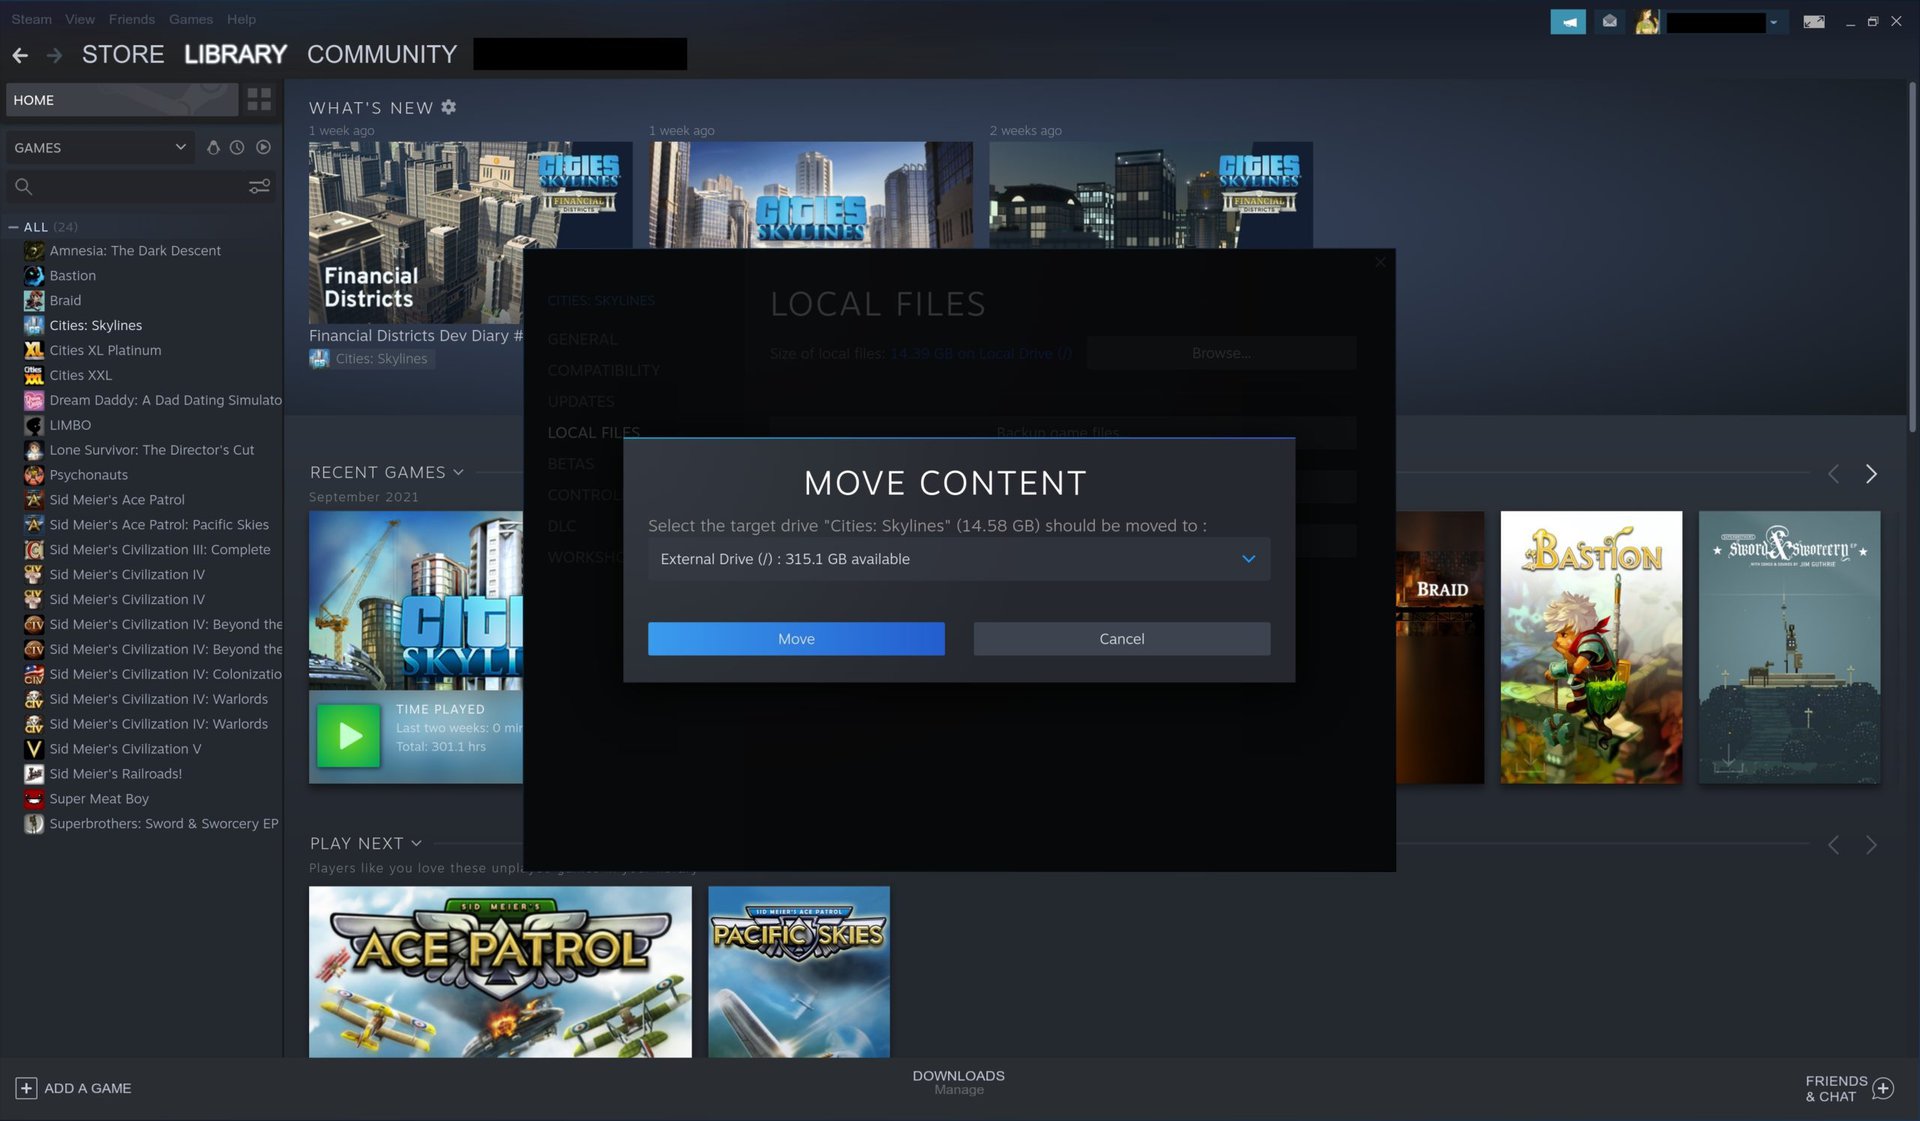 How To Download Steam Games To External Hard Drive